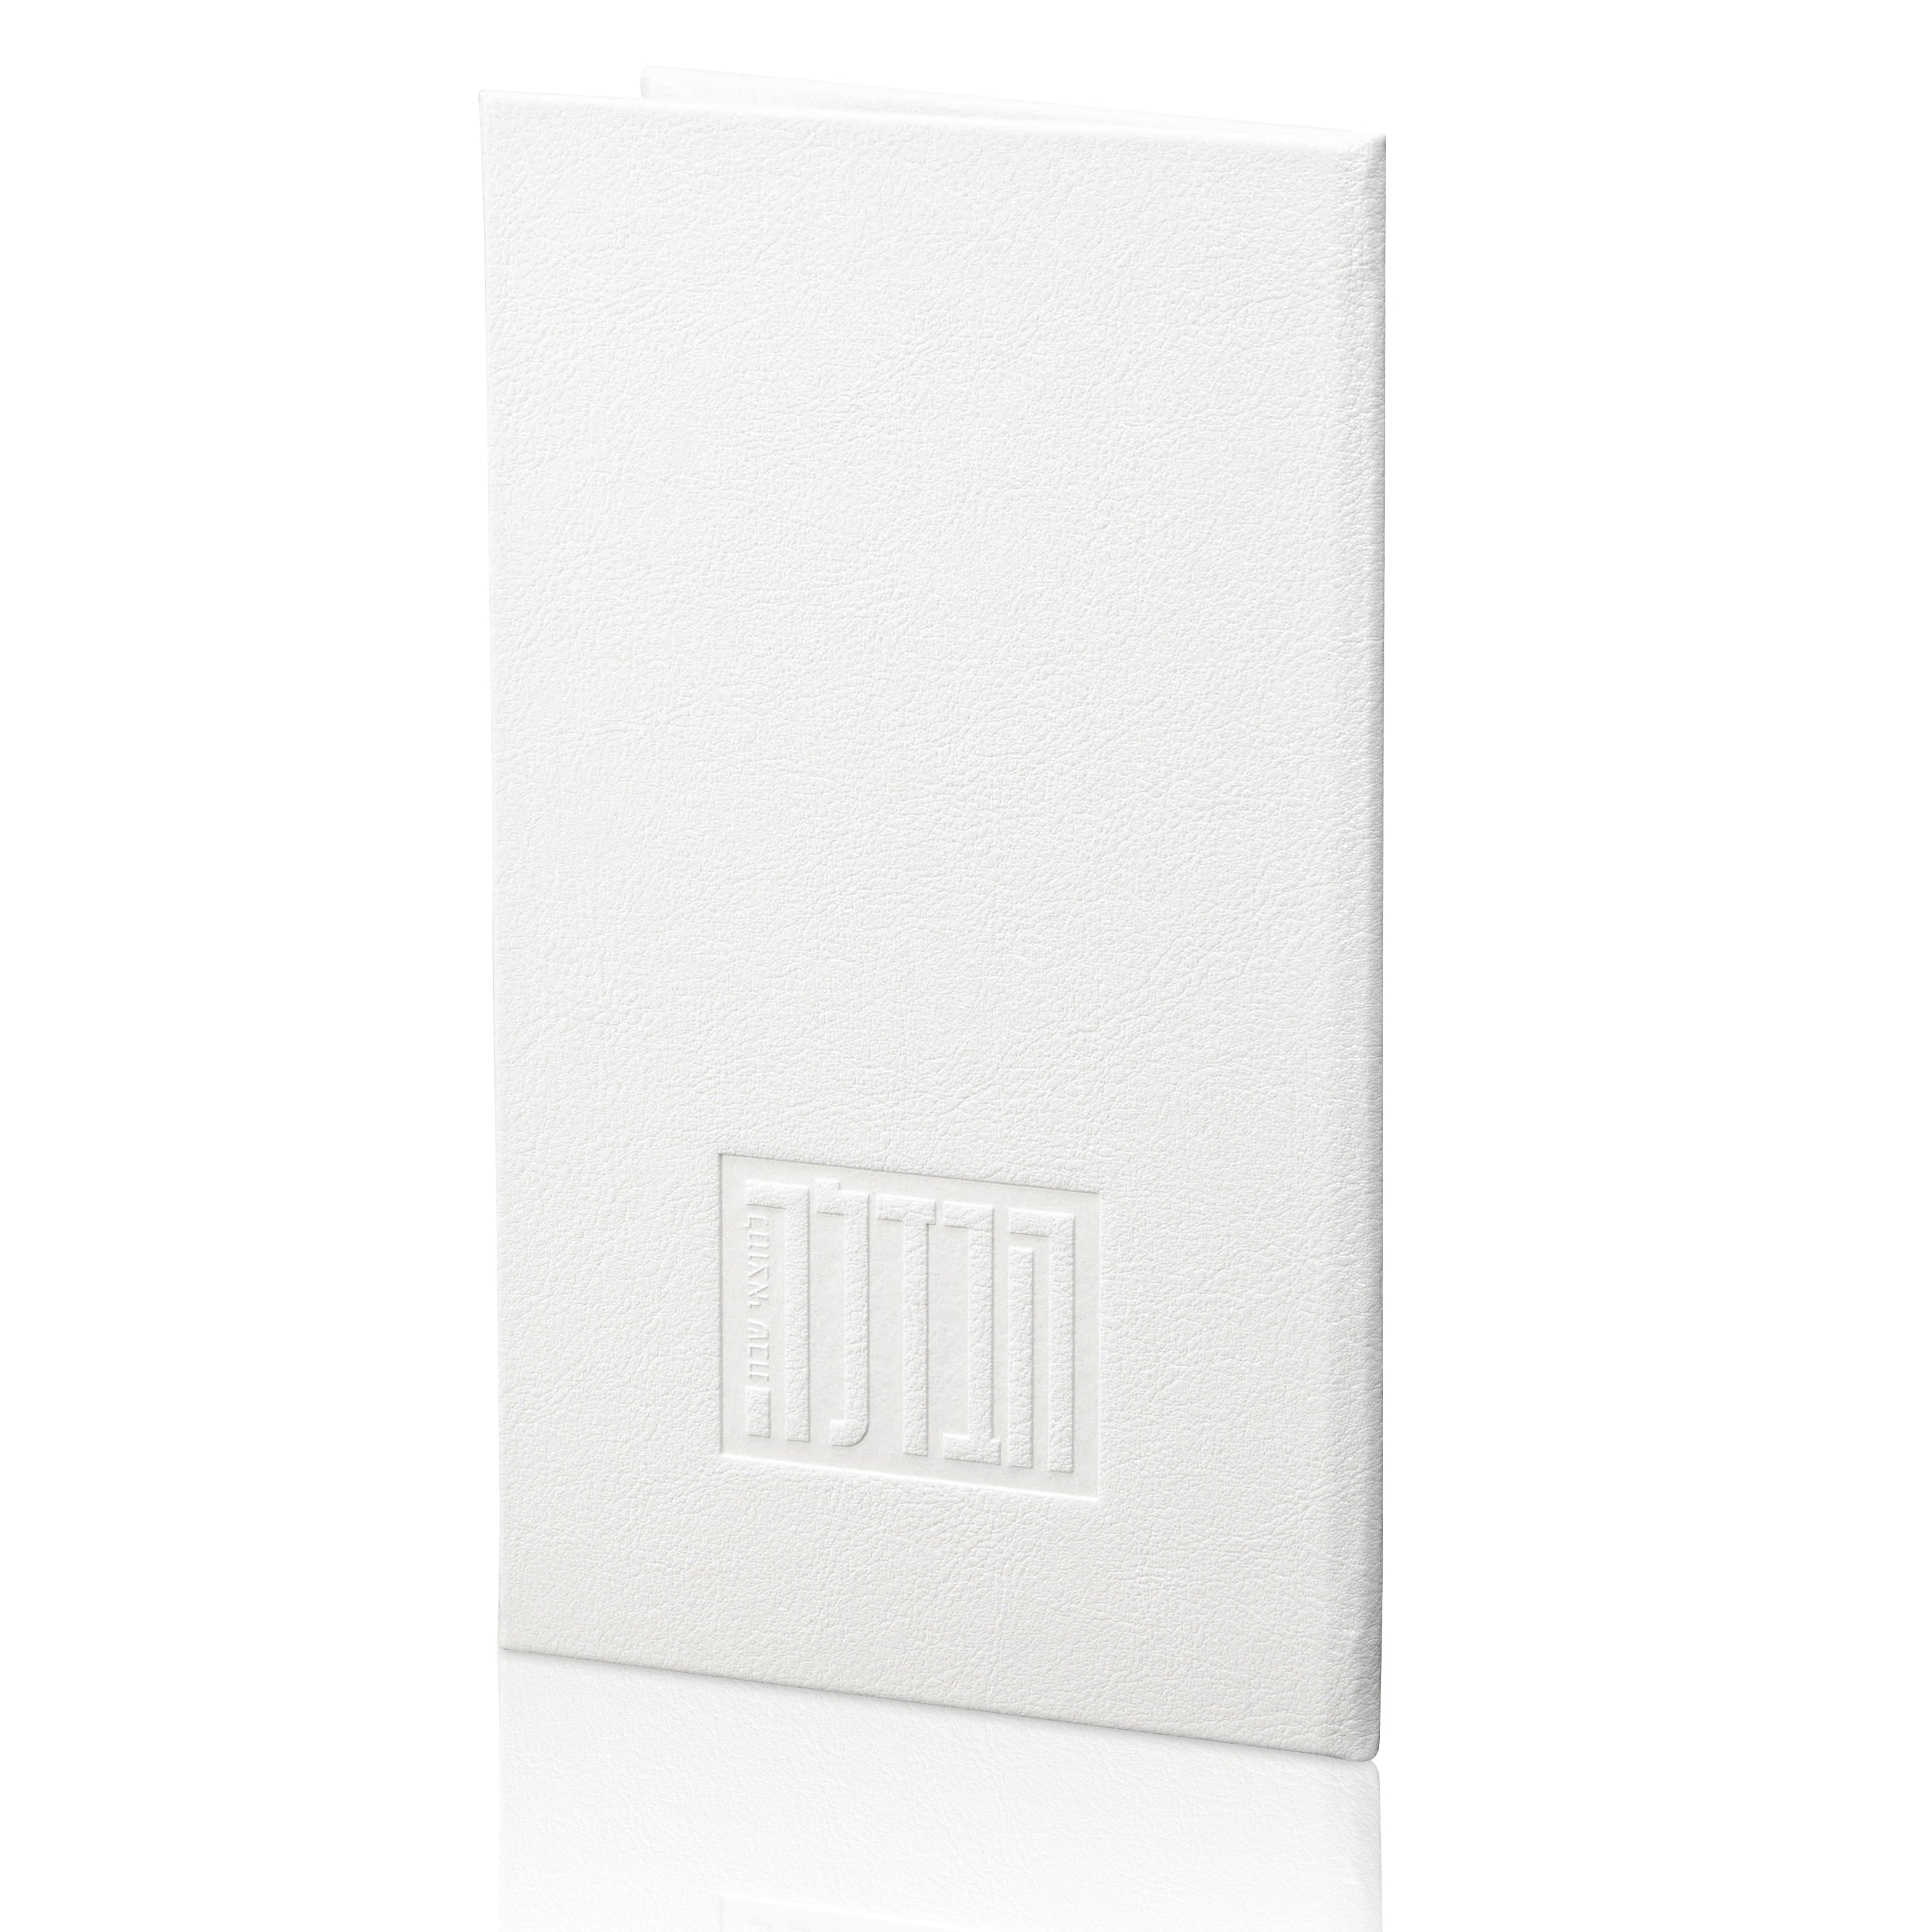 Leather Hardcover Havdalah Booklet - Waterdale Collection